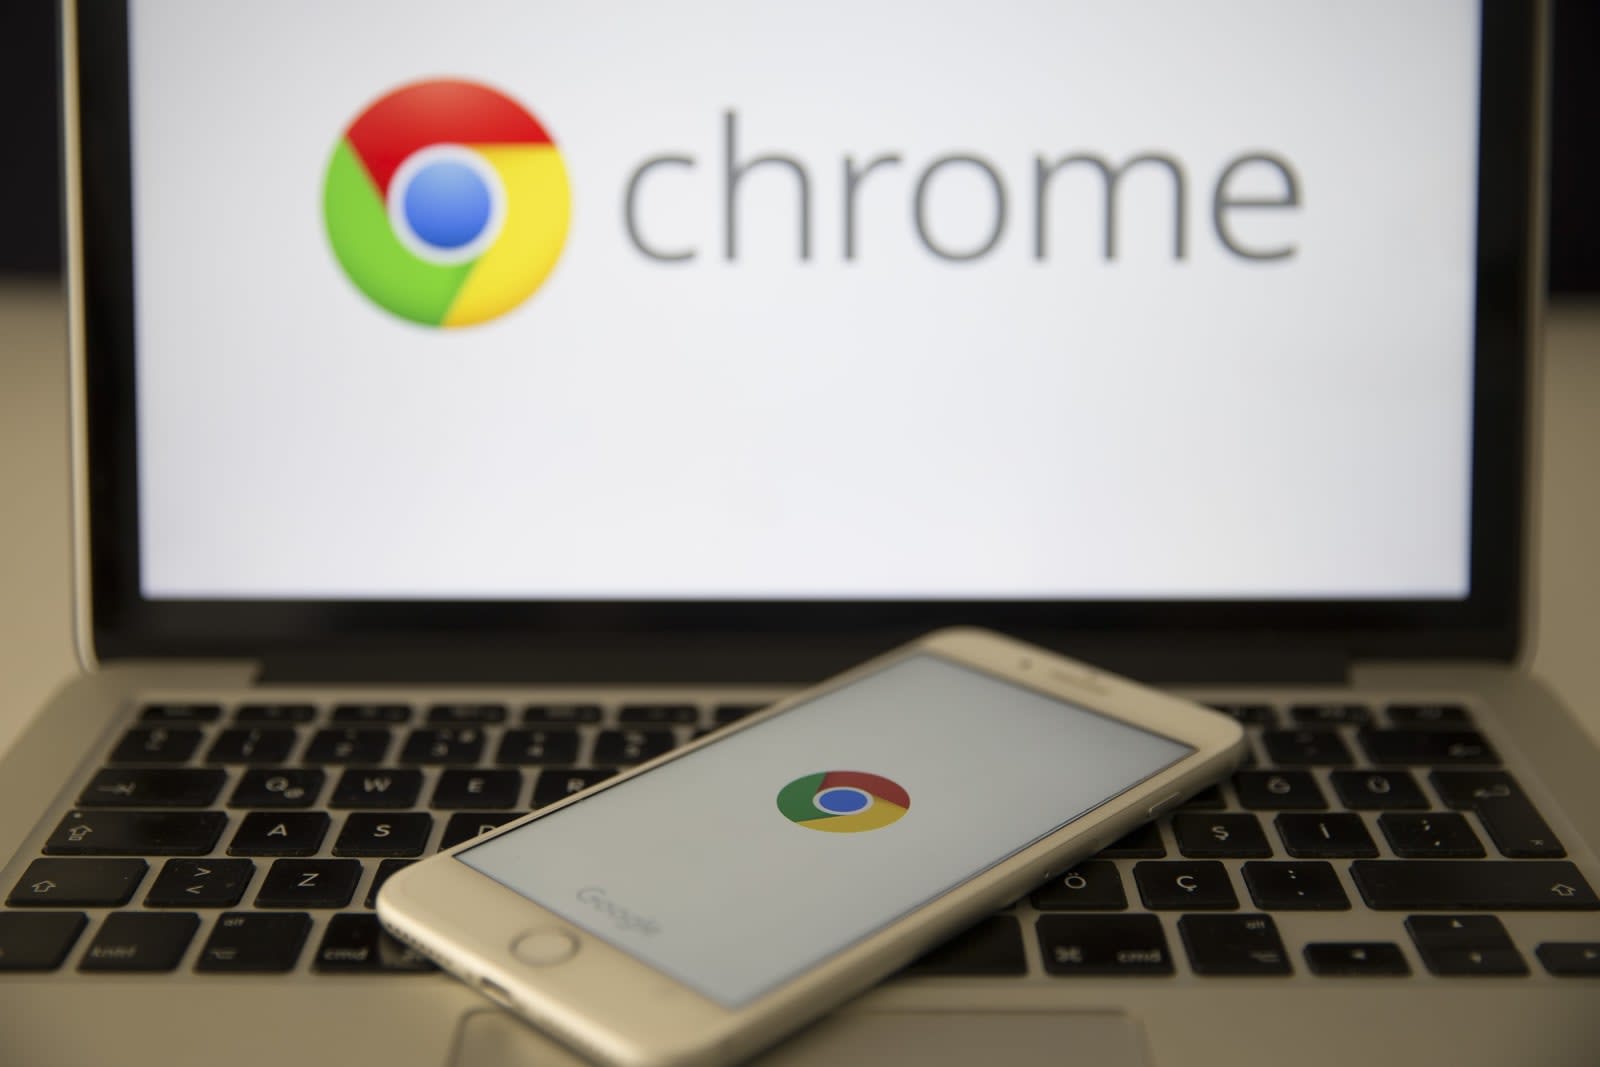 Chrome will soon hide those annoying website notification requests